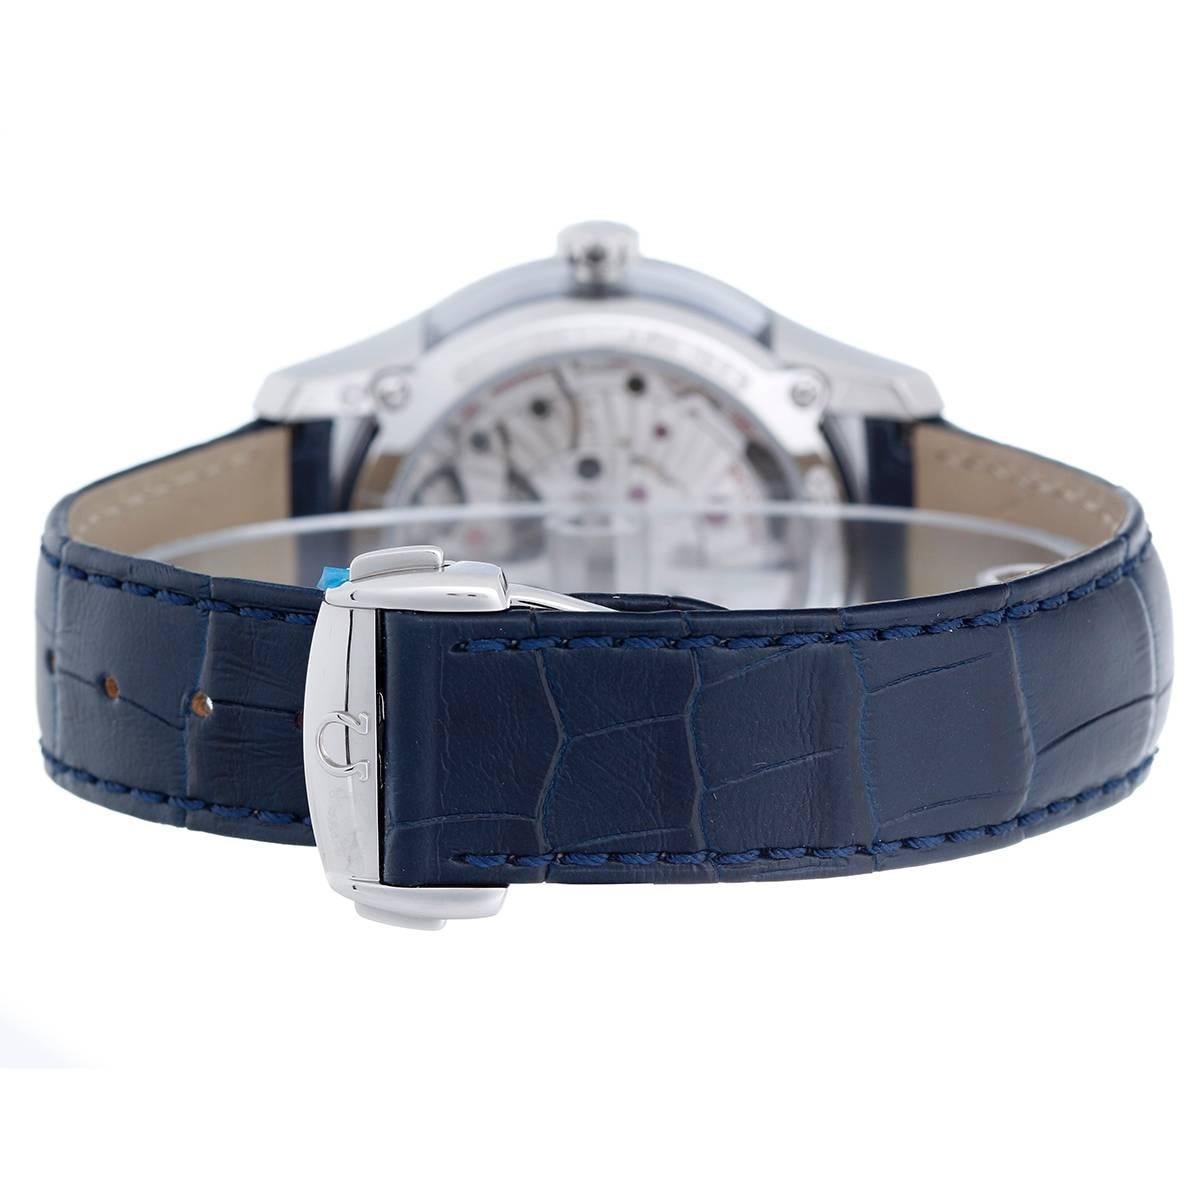 Automatic winding. Stainless steel case with exposition sides and back (41mm diameter). Blue dial with silver stick markers; date at 3 o'clock. Blue alligator strap band with stainless steel deployant buckle. Pre-owned with box and papers.

Ref